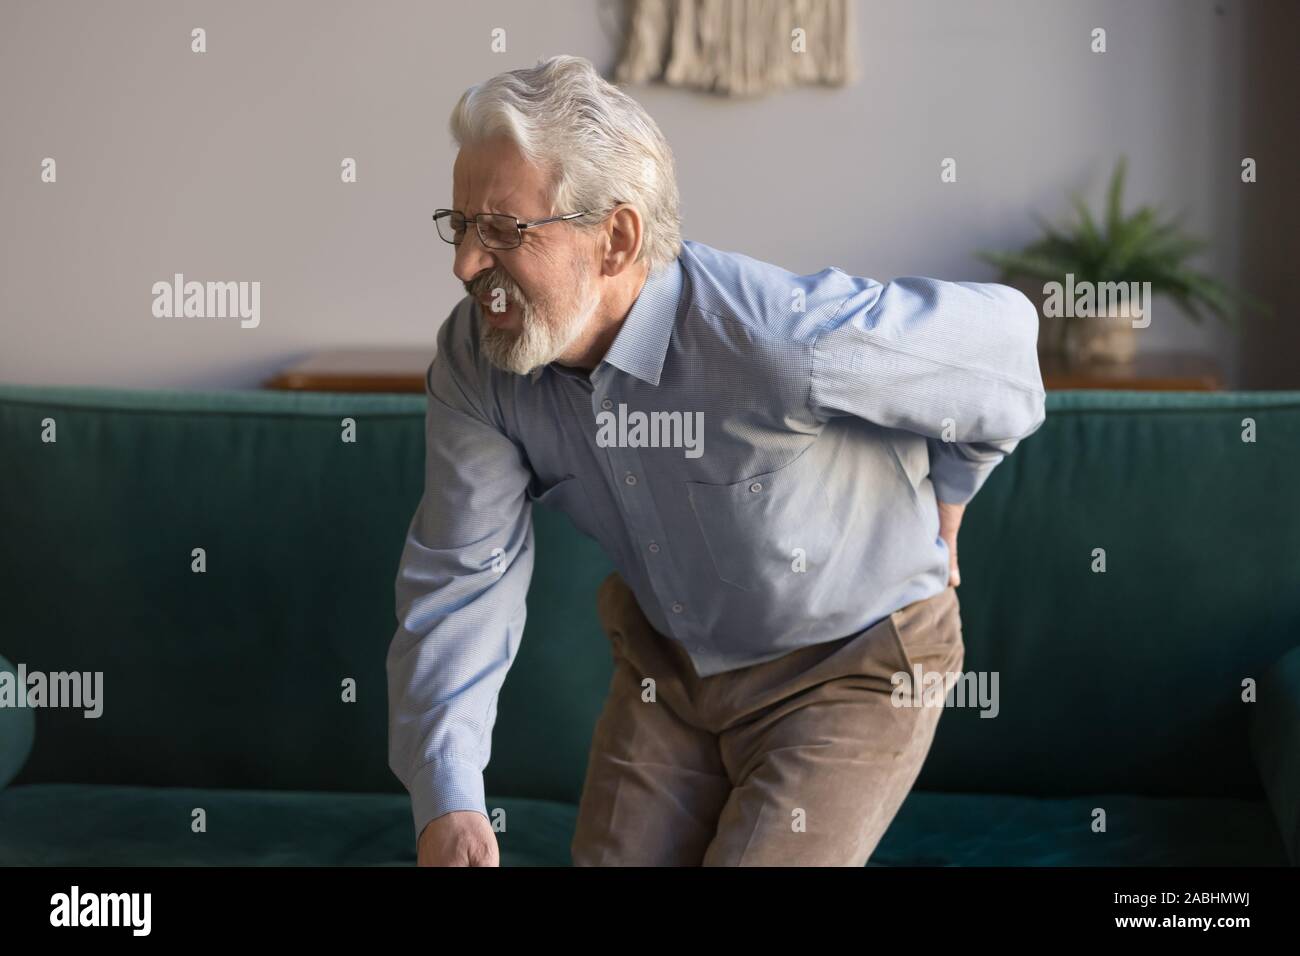 Elderly man writhes in pain suffers from low back strain Stock Photo